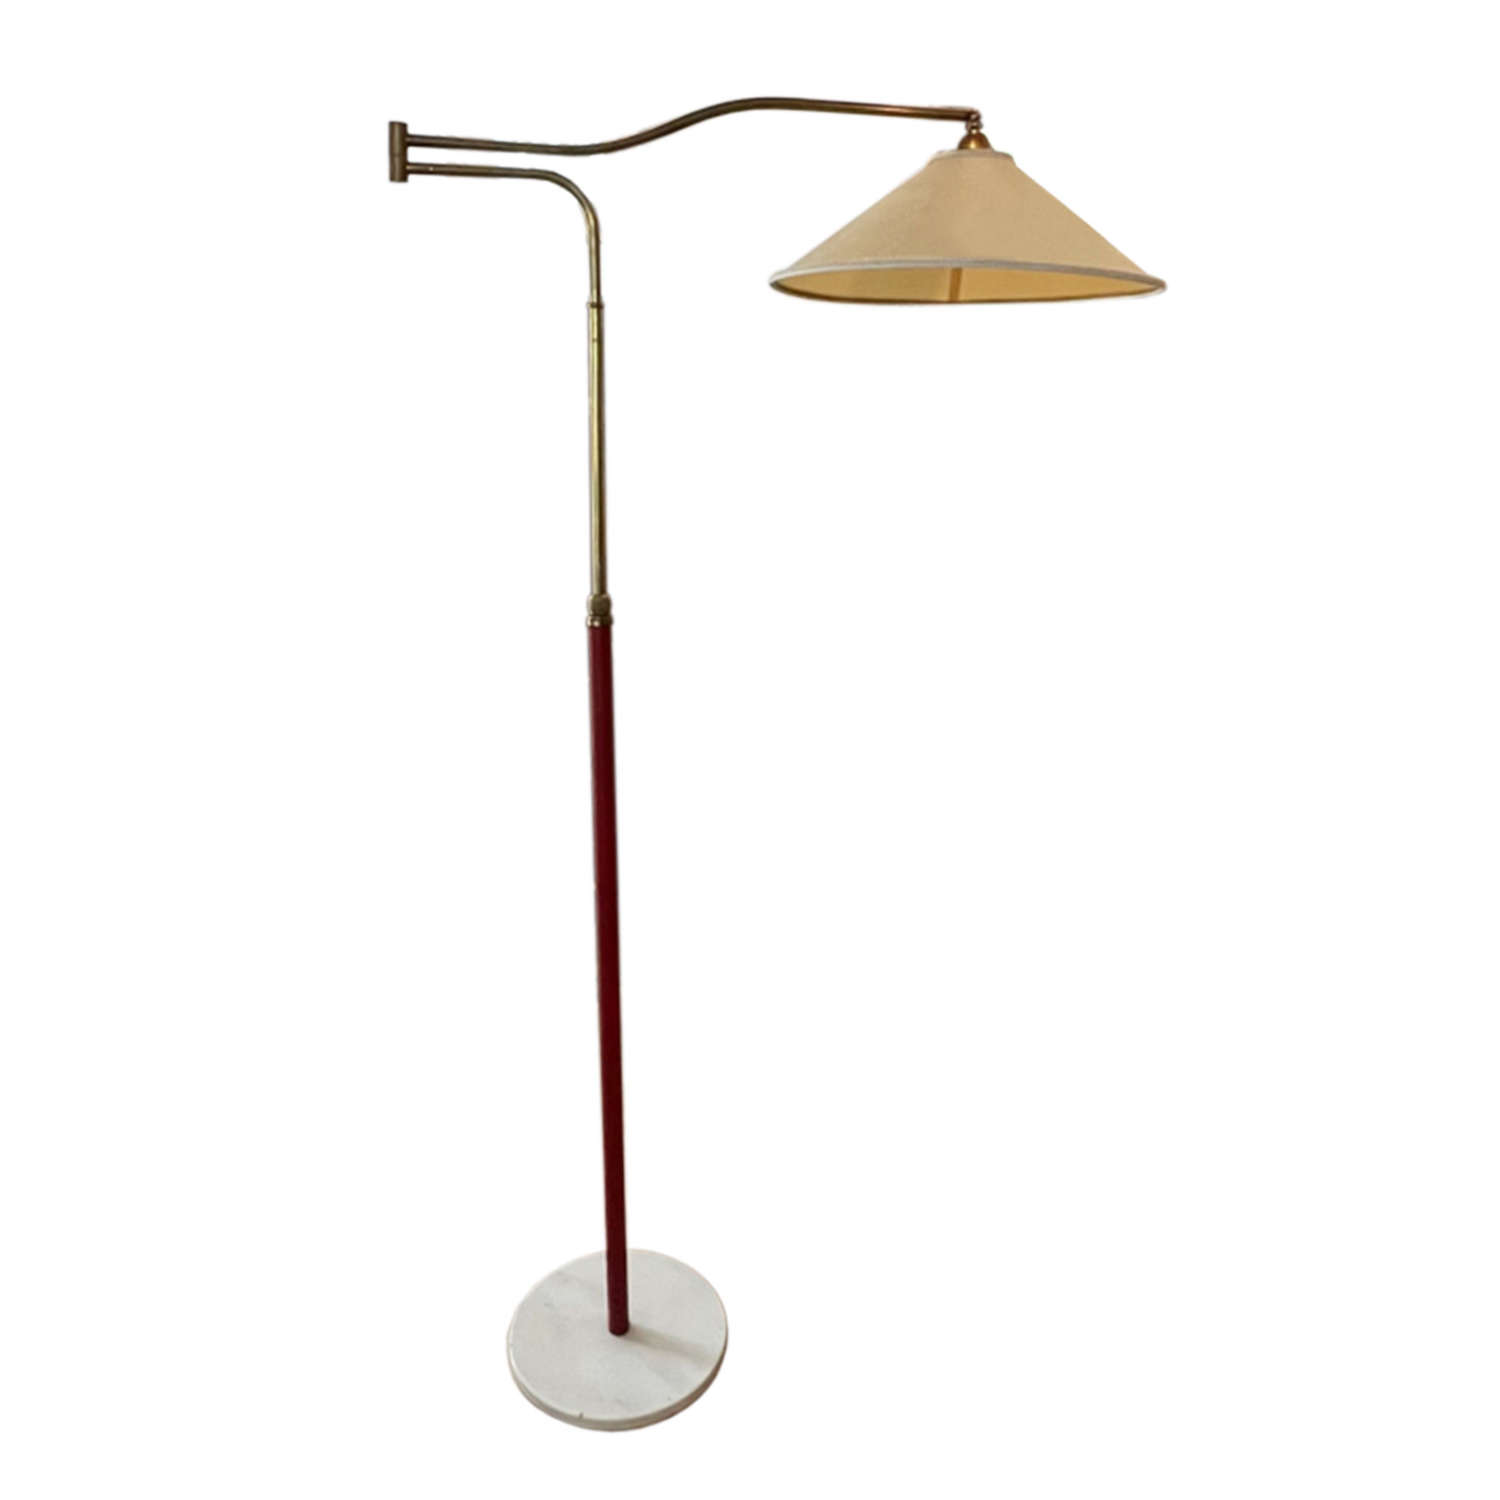 Italian 1960s Swing Arm Floor Lamp with Red Leather